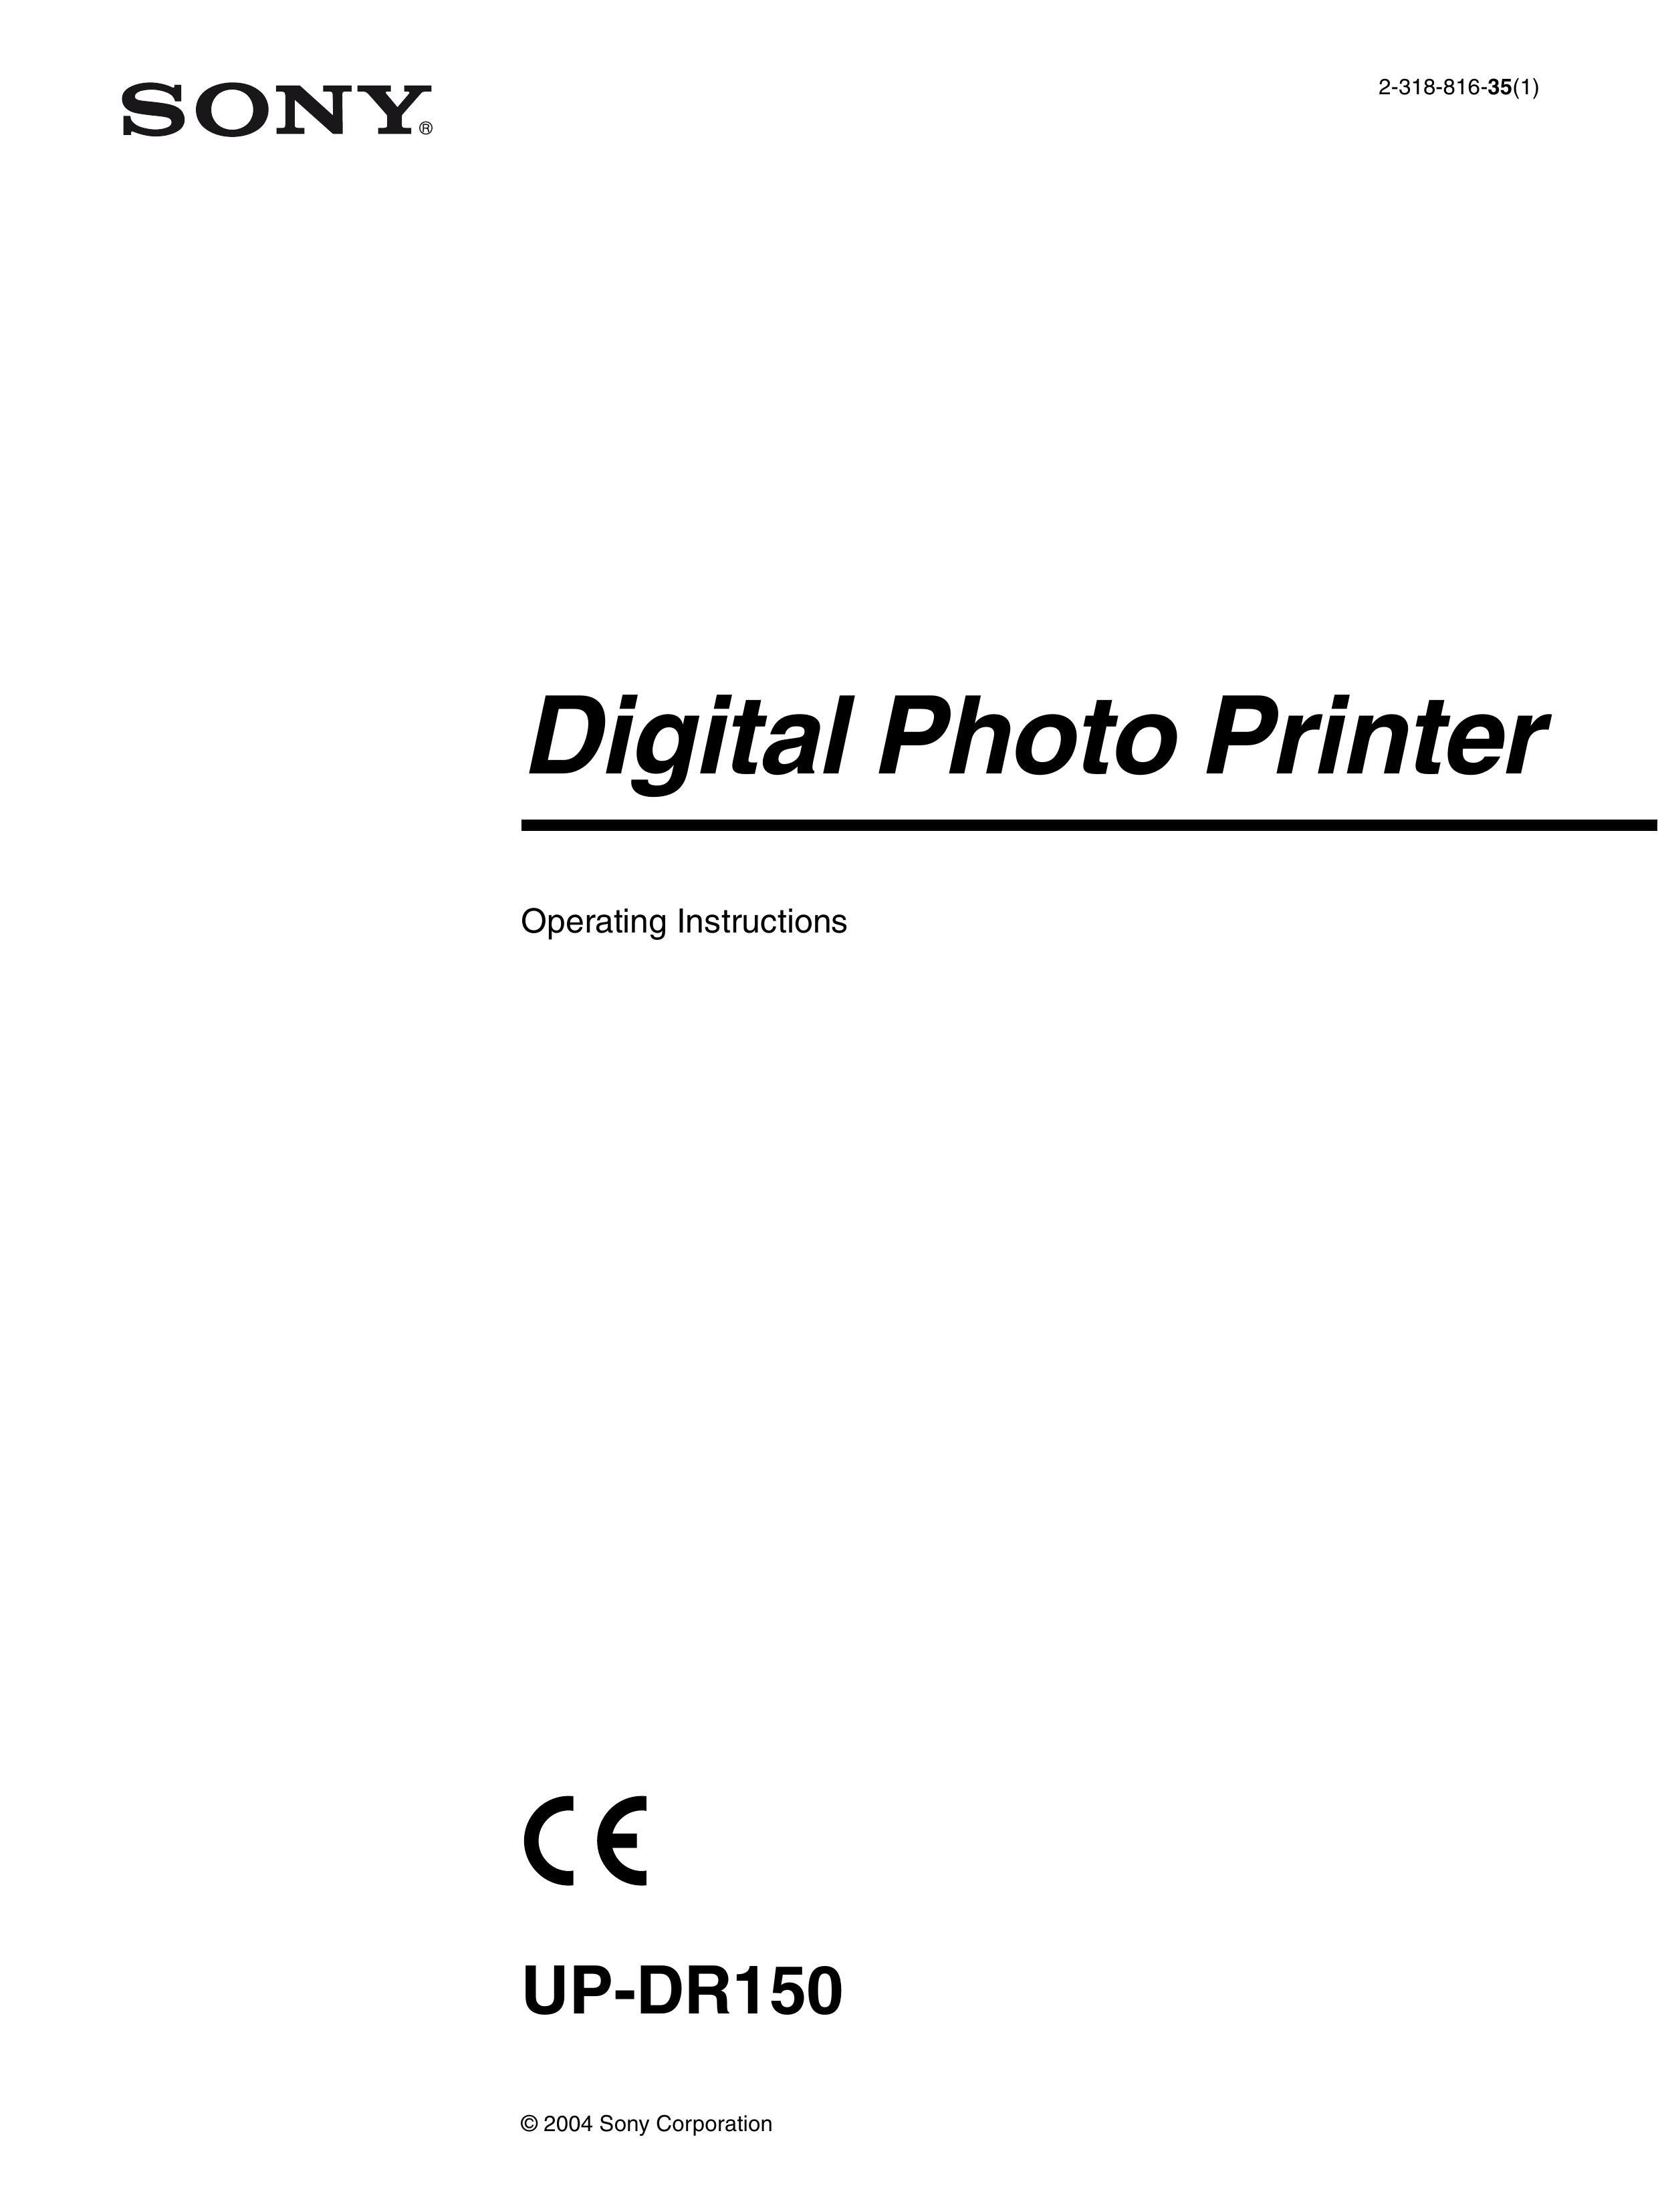 Sony UP-DR150 Photo Printer User Manual